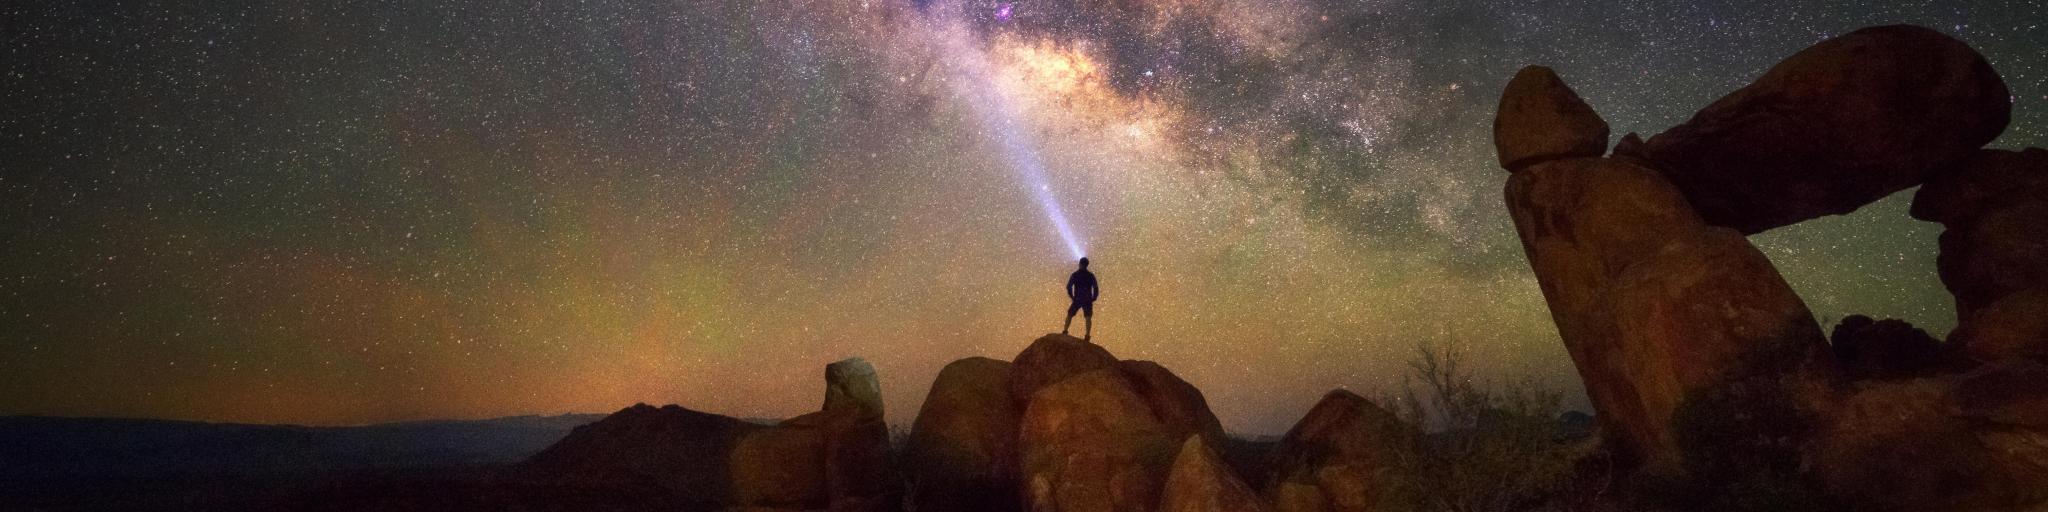 Night time view of star constellation and galaxy at Balanced Rock, Big Bend National Park, with silhouetted profile of someone standing on the rockface